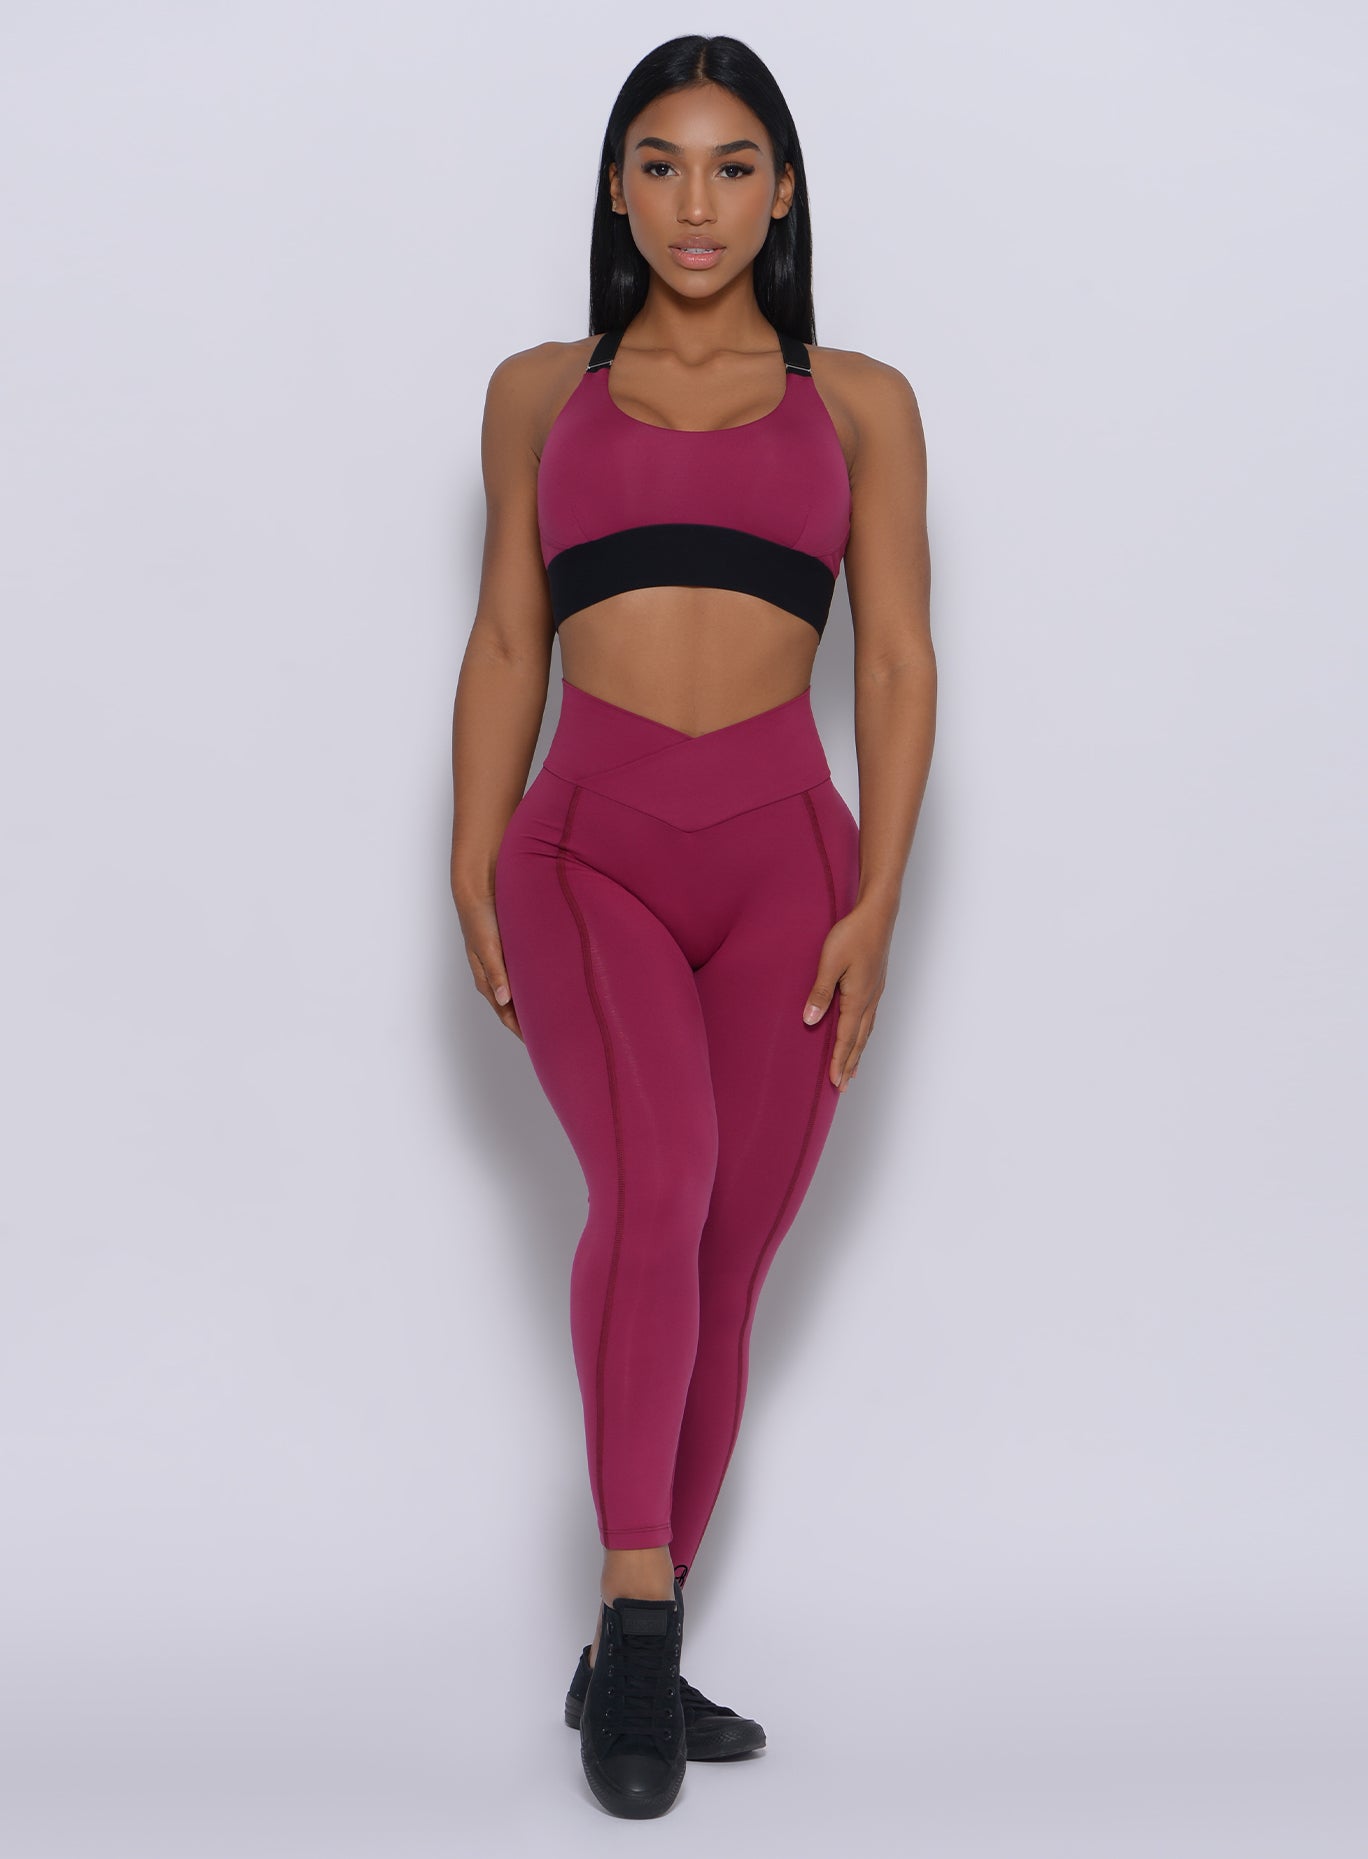 Front profile view of the model in our Brazilian leggings in mulberry color and a matching bra